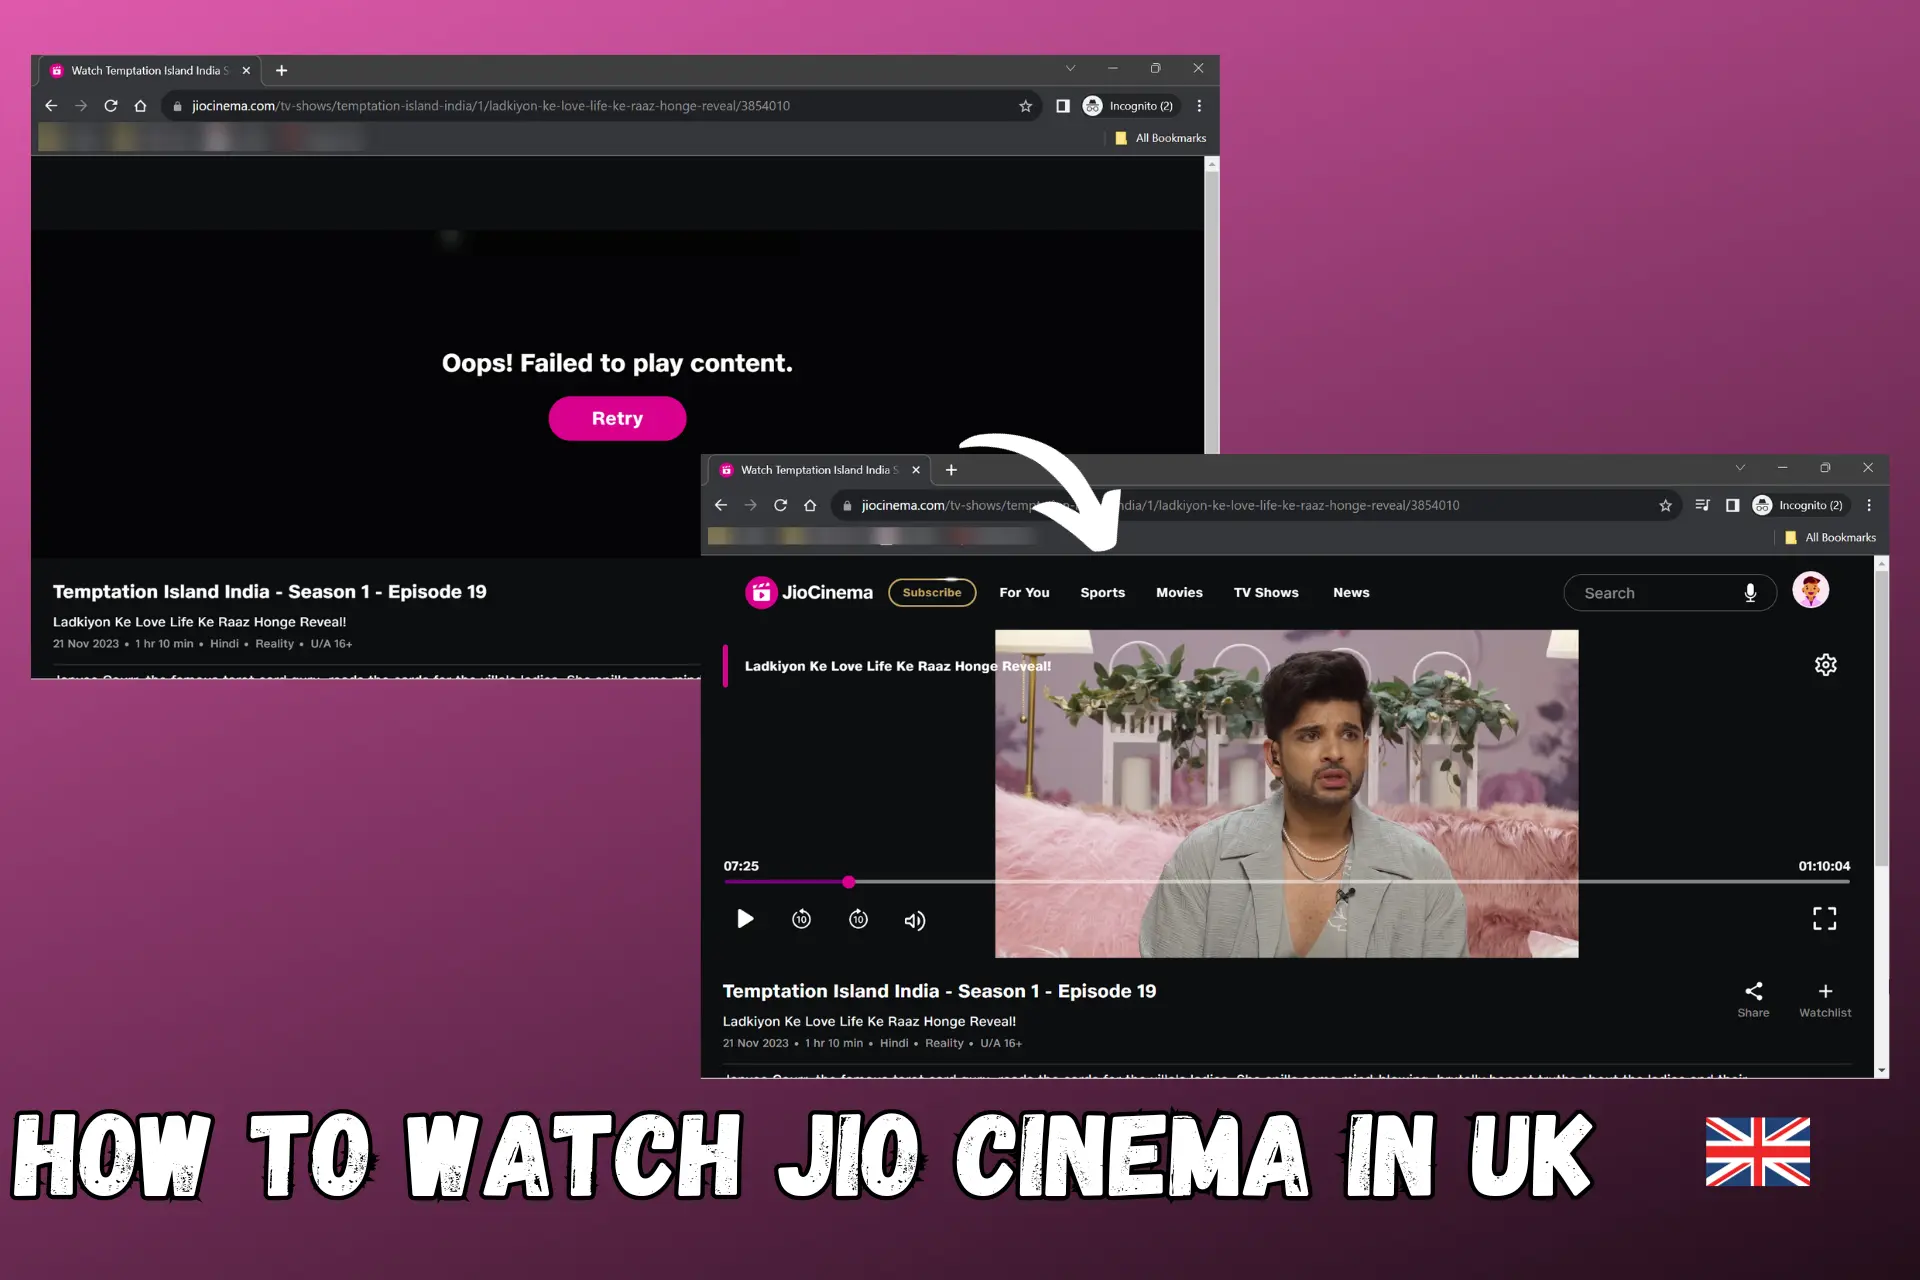 How to Watch Jio Cinema in the UK